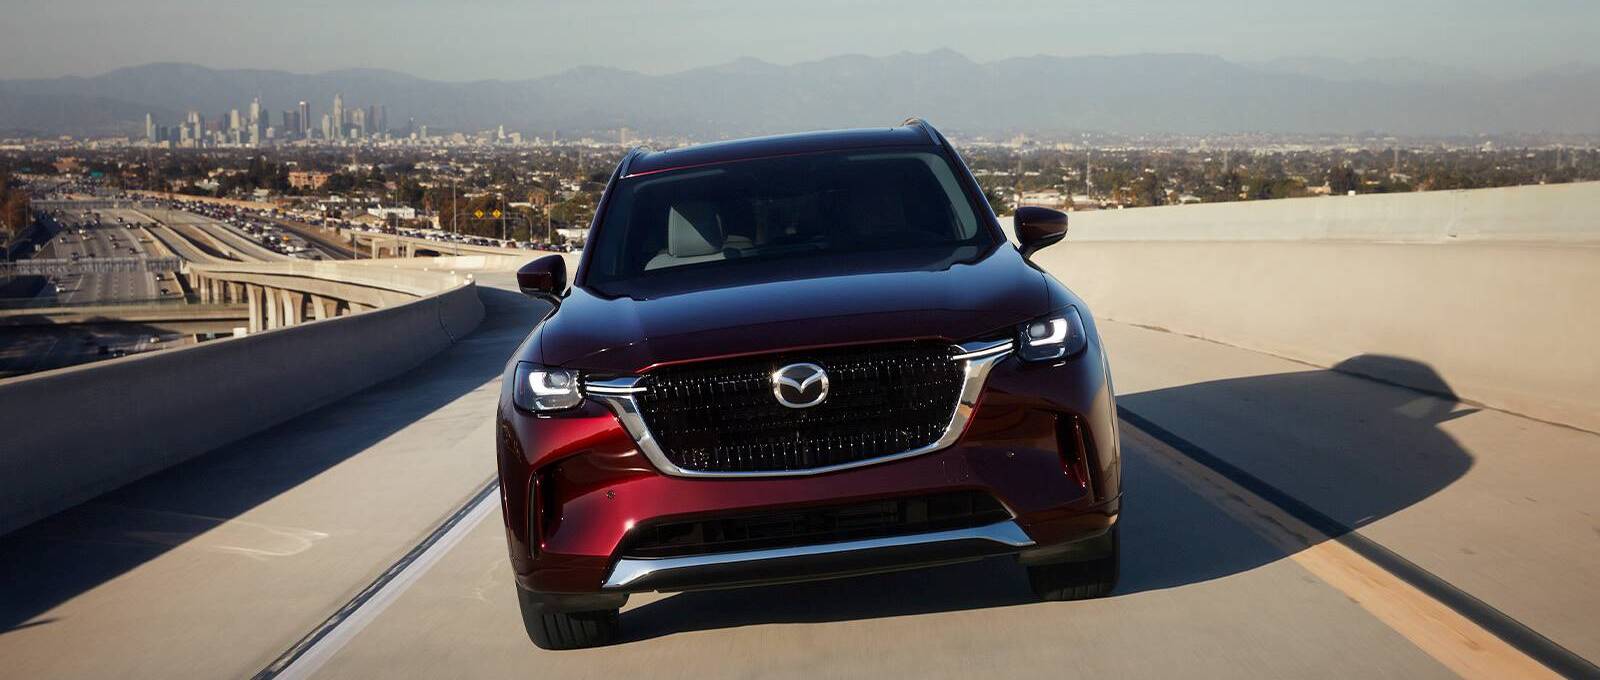 2021 Mazda CX-30 Turbo: For The Sport Compact Car Reader Who Has Babies Now